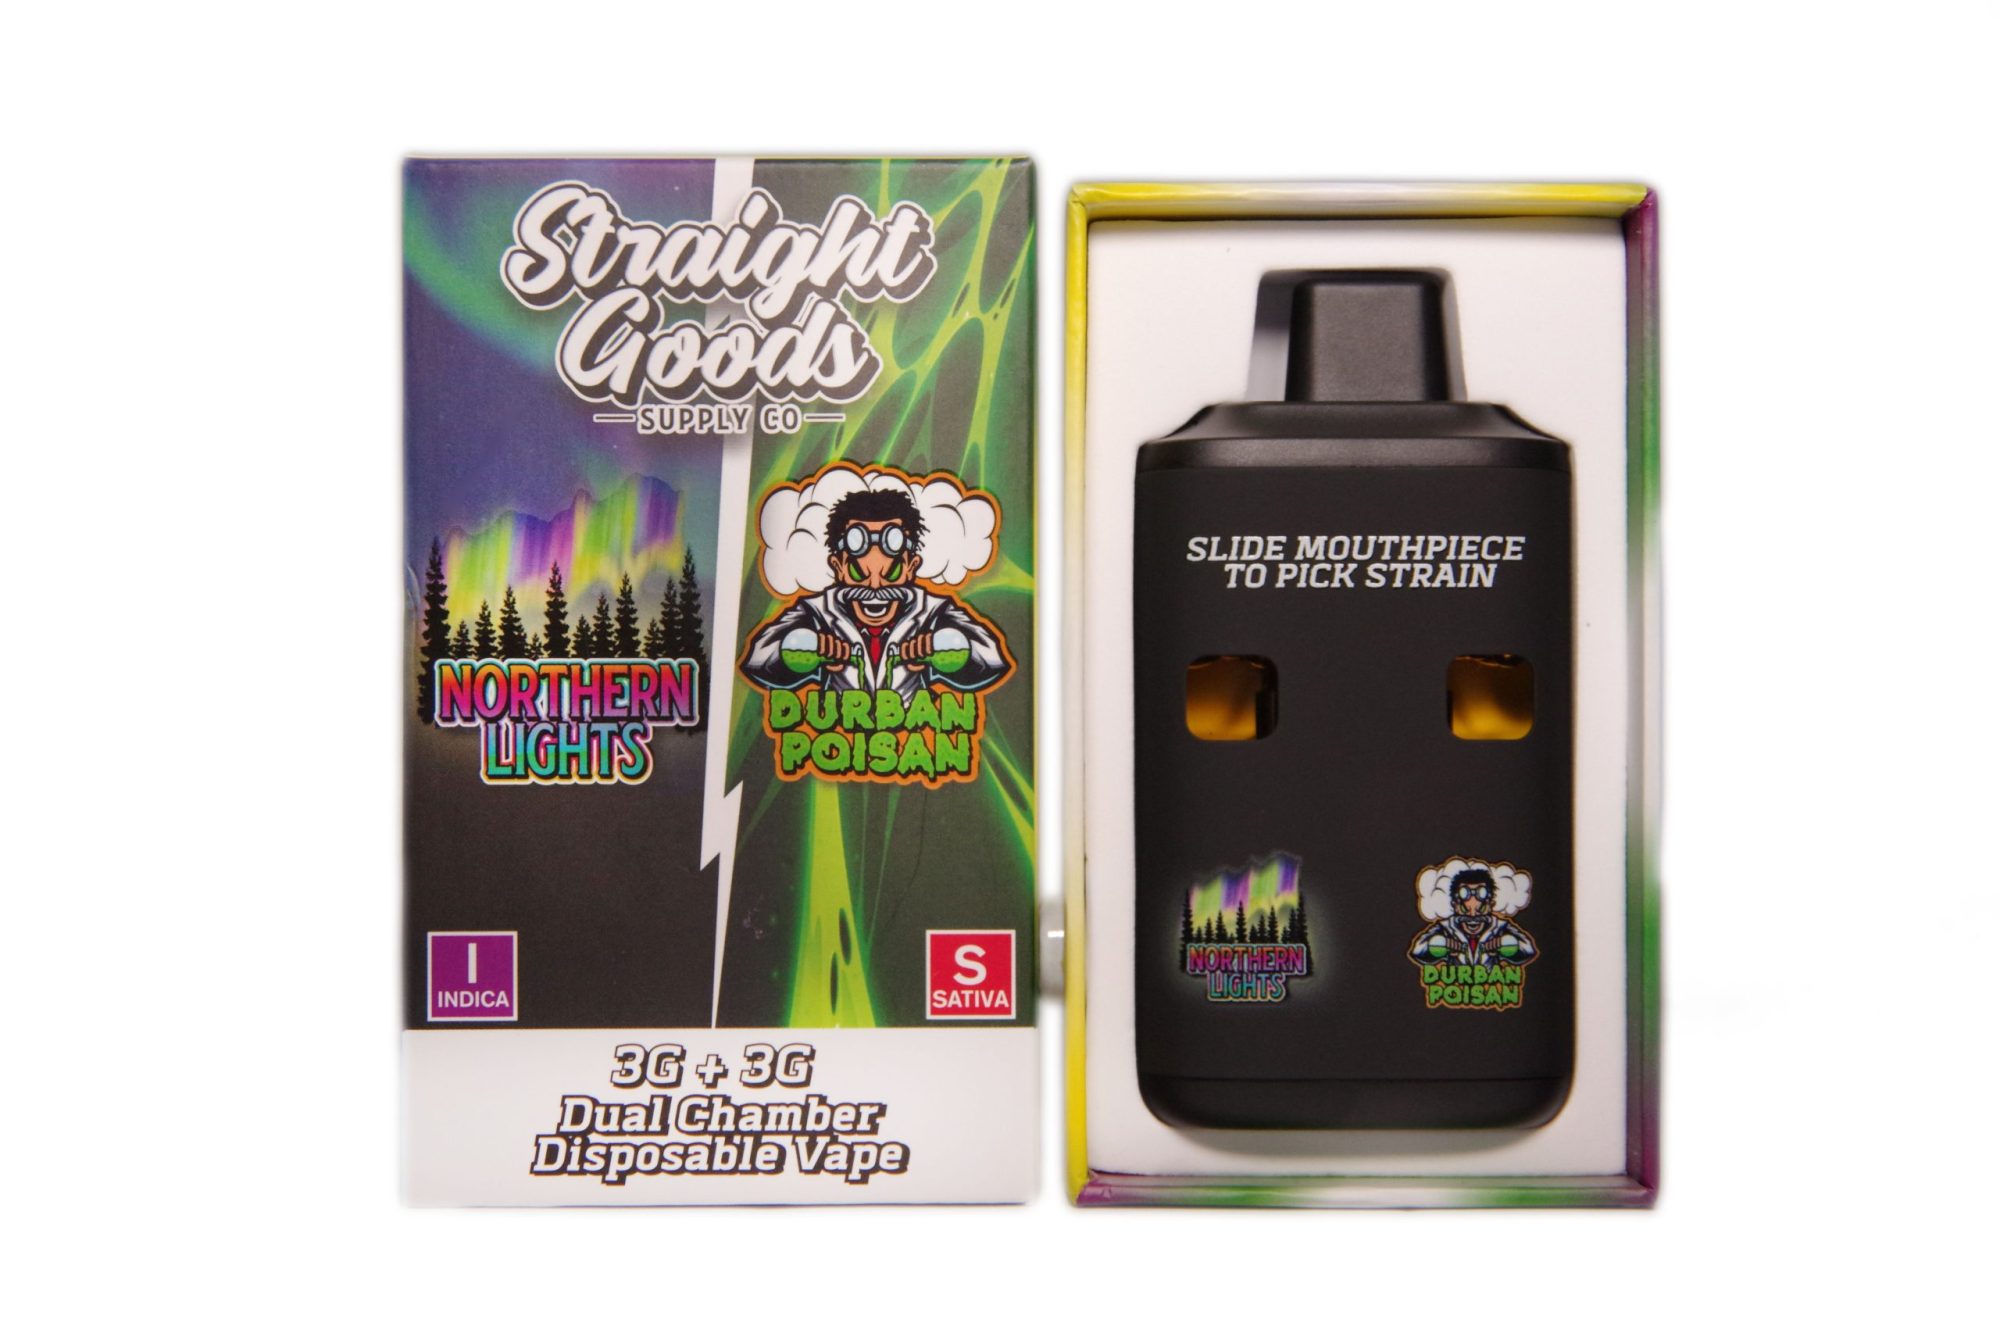 Buy Straight Goods - Dual Chamber Vape - Northern Lights + Durban Poison (3 Grams + 3 Grams) at Wccannabis Online Shop